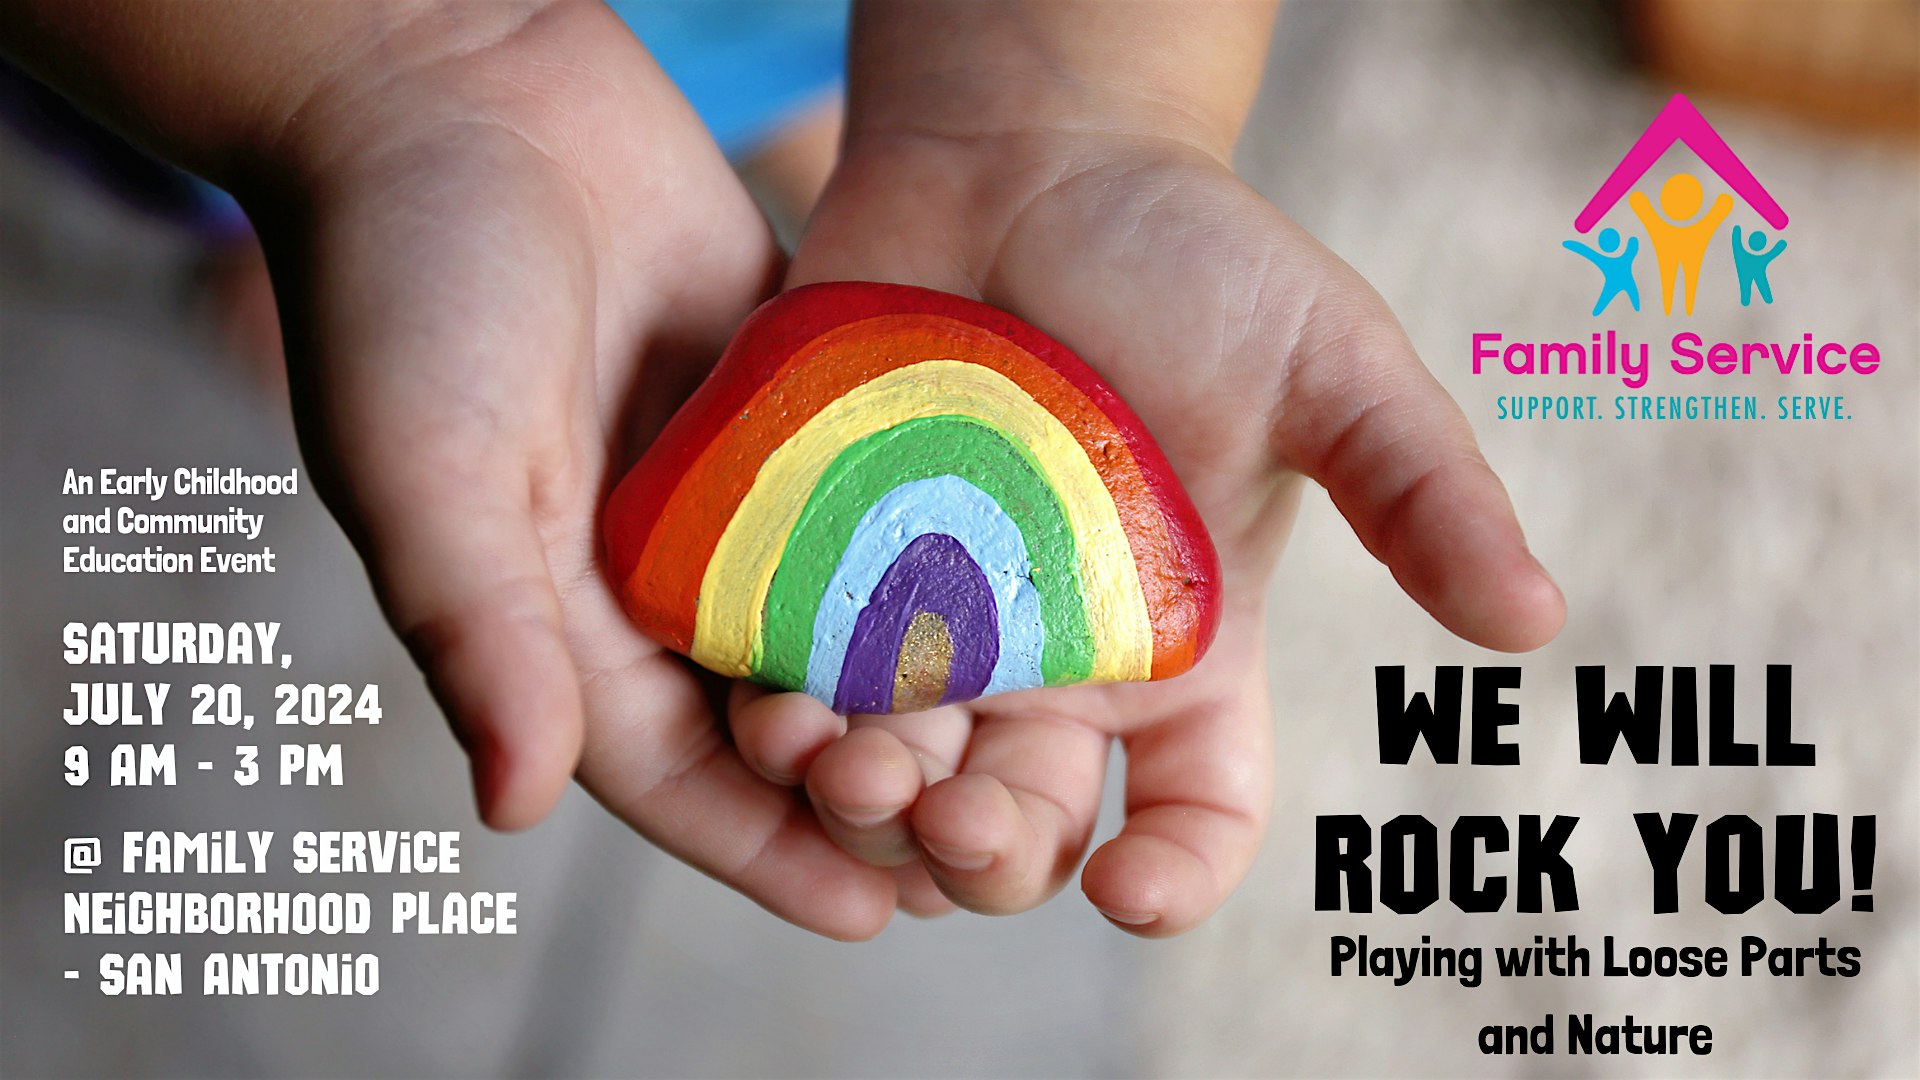 We Will Rock You! Playing with Loose Parts and Nature